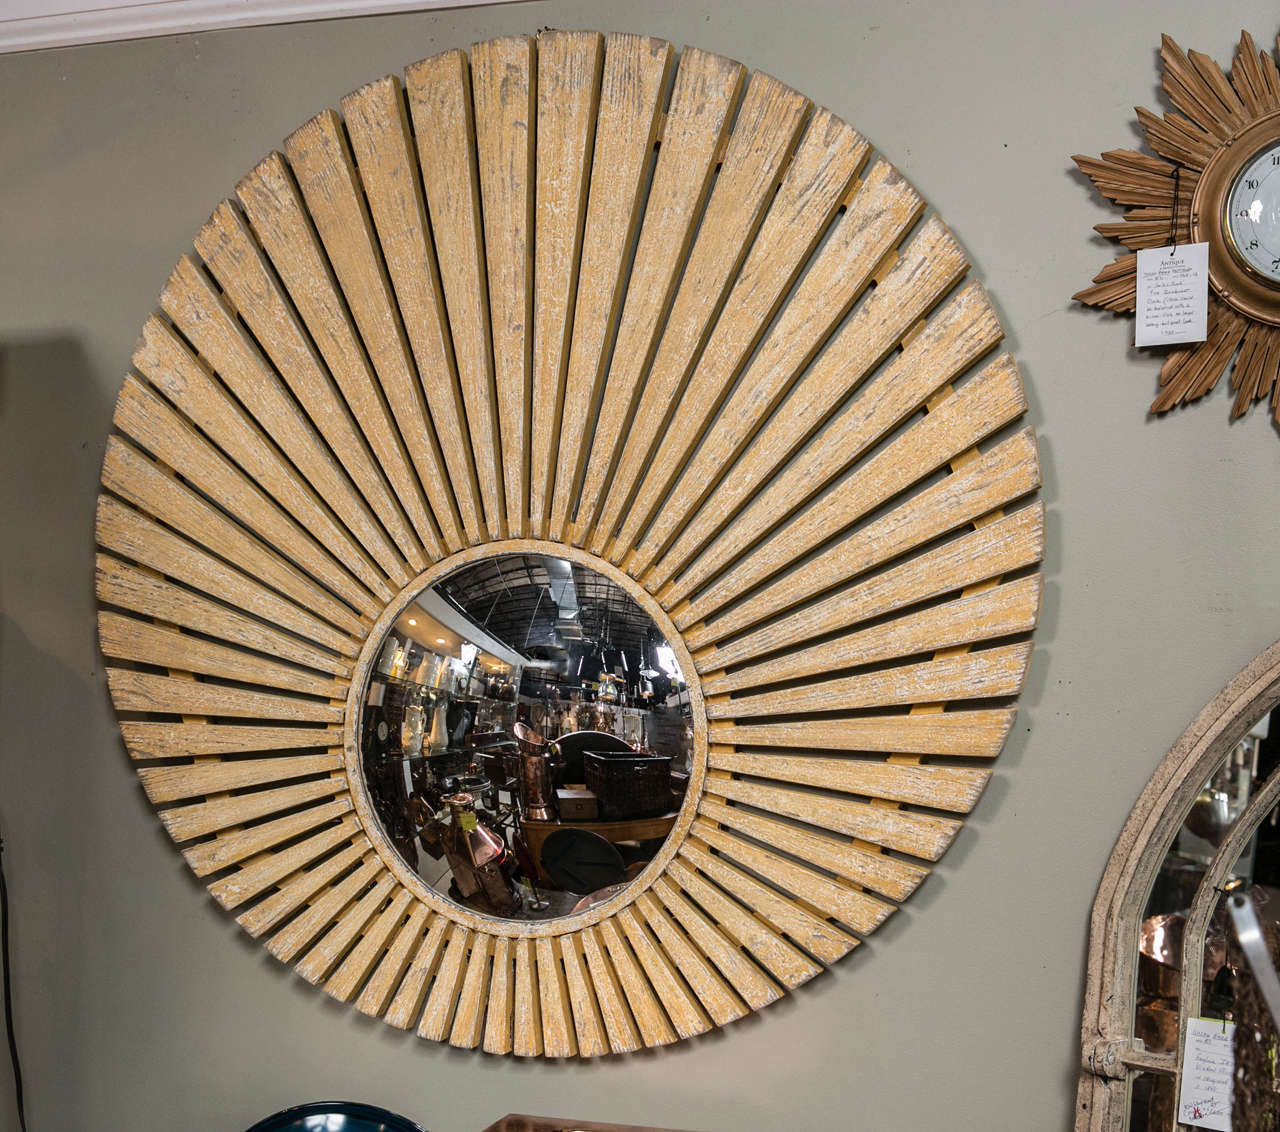 #038-15  
Sunrise ‘Belgium style’ Convex Mirror -Mirror on bottom, not in middle -Made from reclaimed pine by English artist in two tone yellow over white paint finish.
It is 48